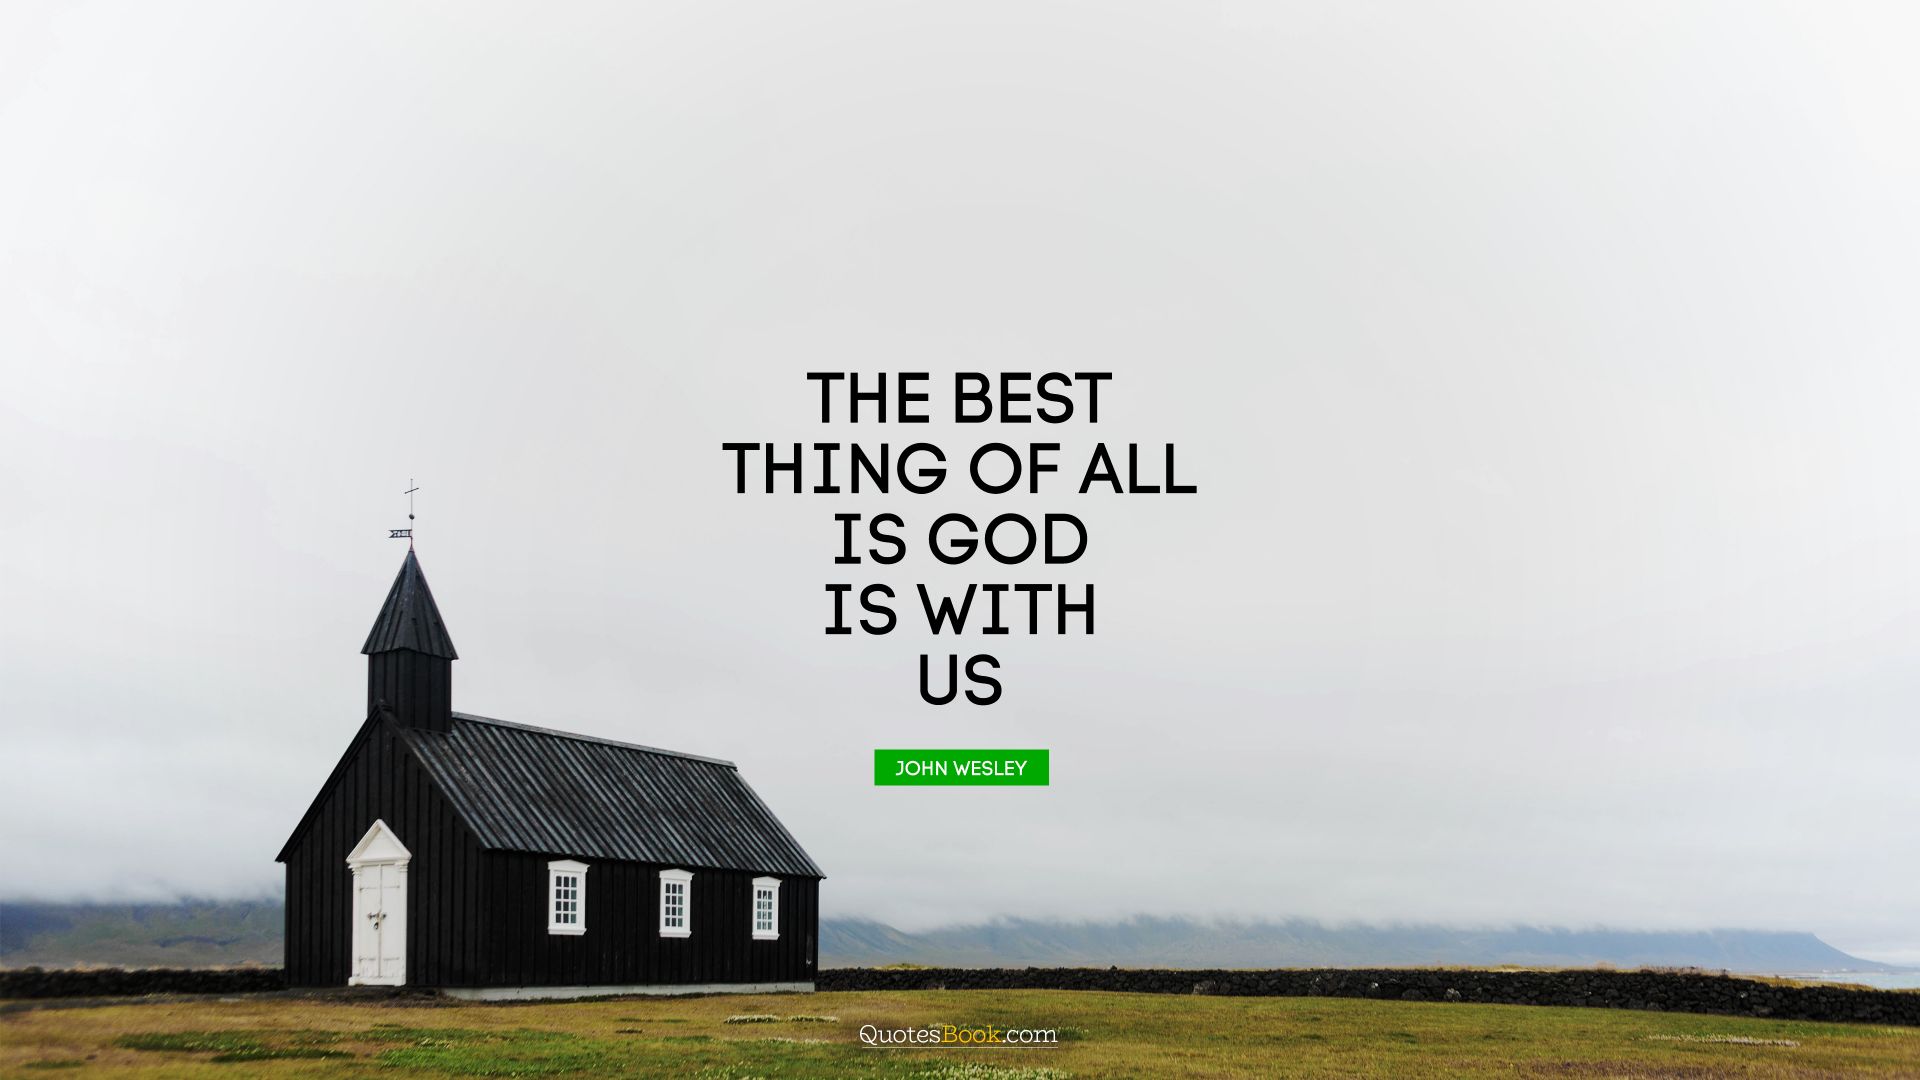 The best thing of all is God is with us. - Quote by John Wesley